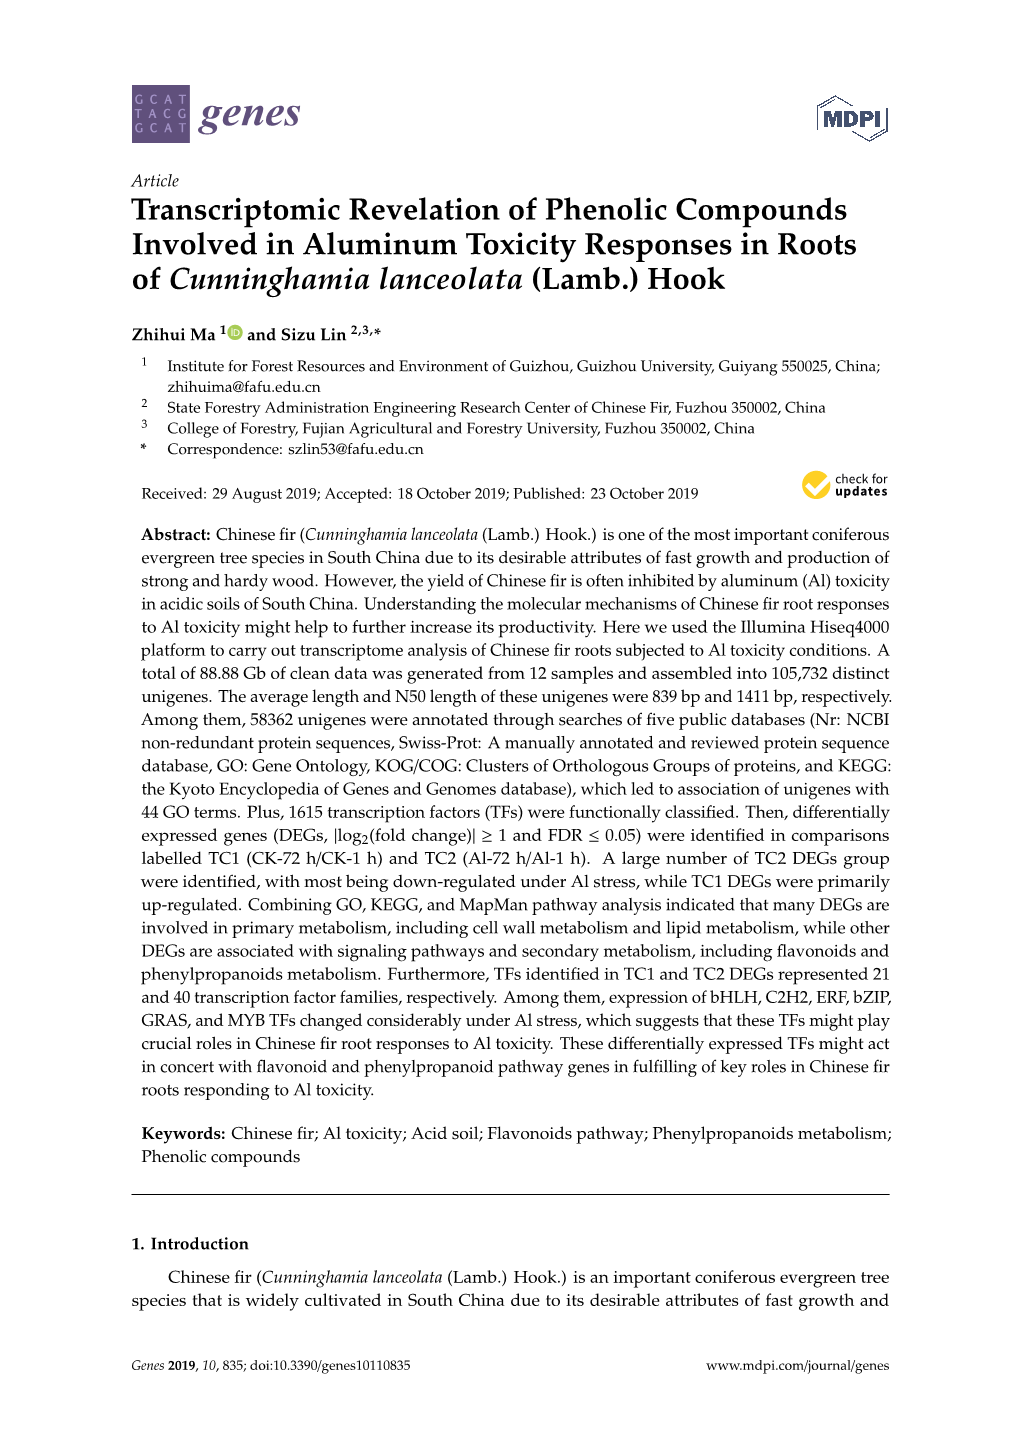 Transcriptomic Revelation of Phenolic Compounds Involved in Aluminum Toxicity Responses in Roots of Cunninghamia Lanceolata (Lamb.) Hook